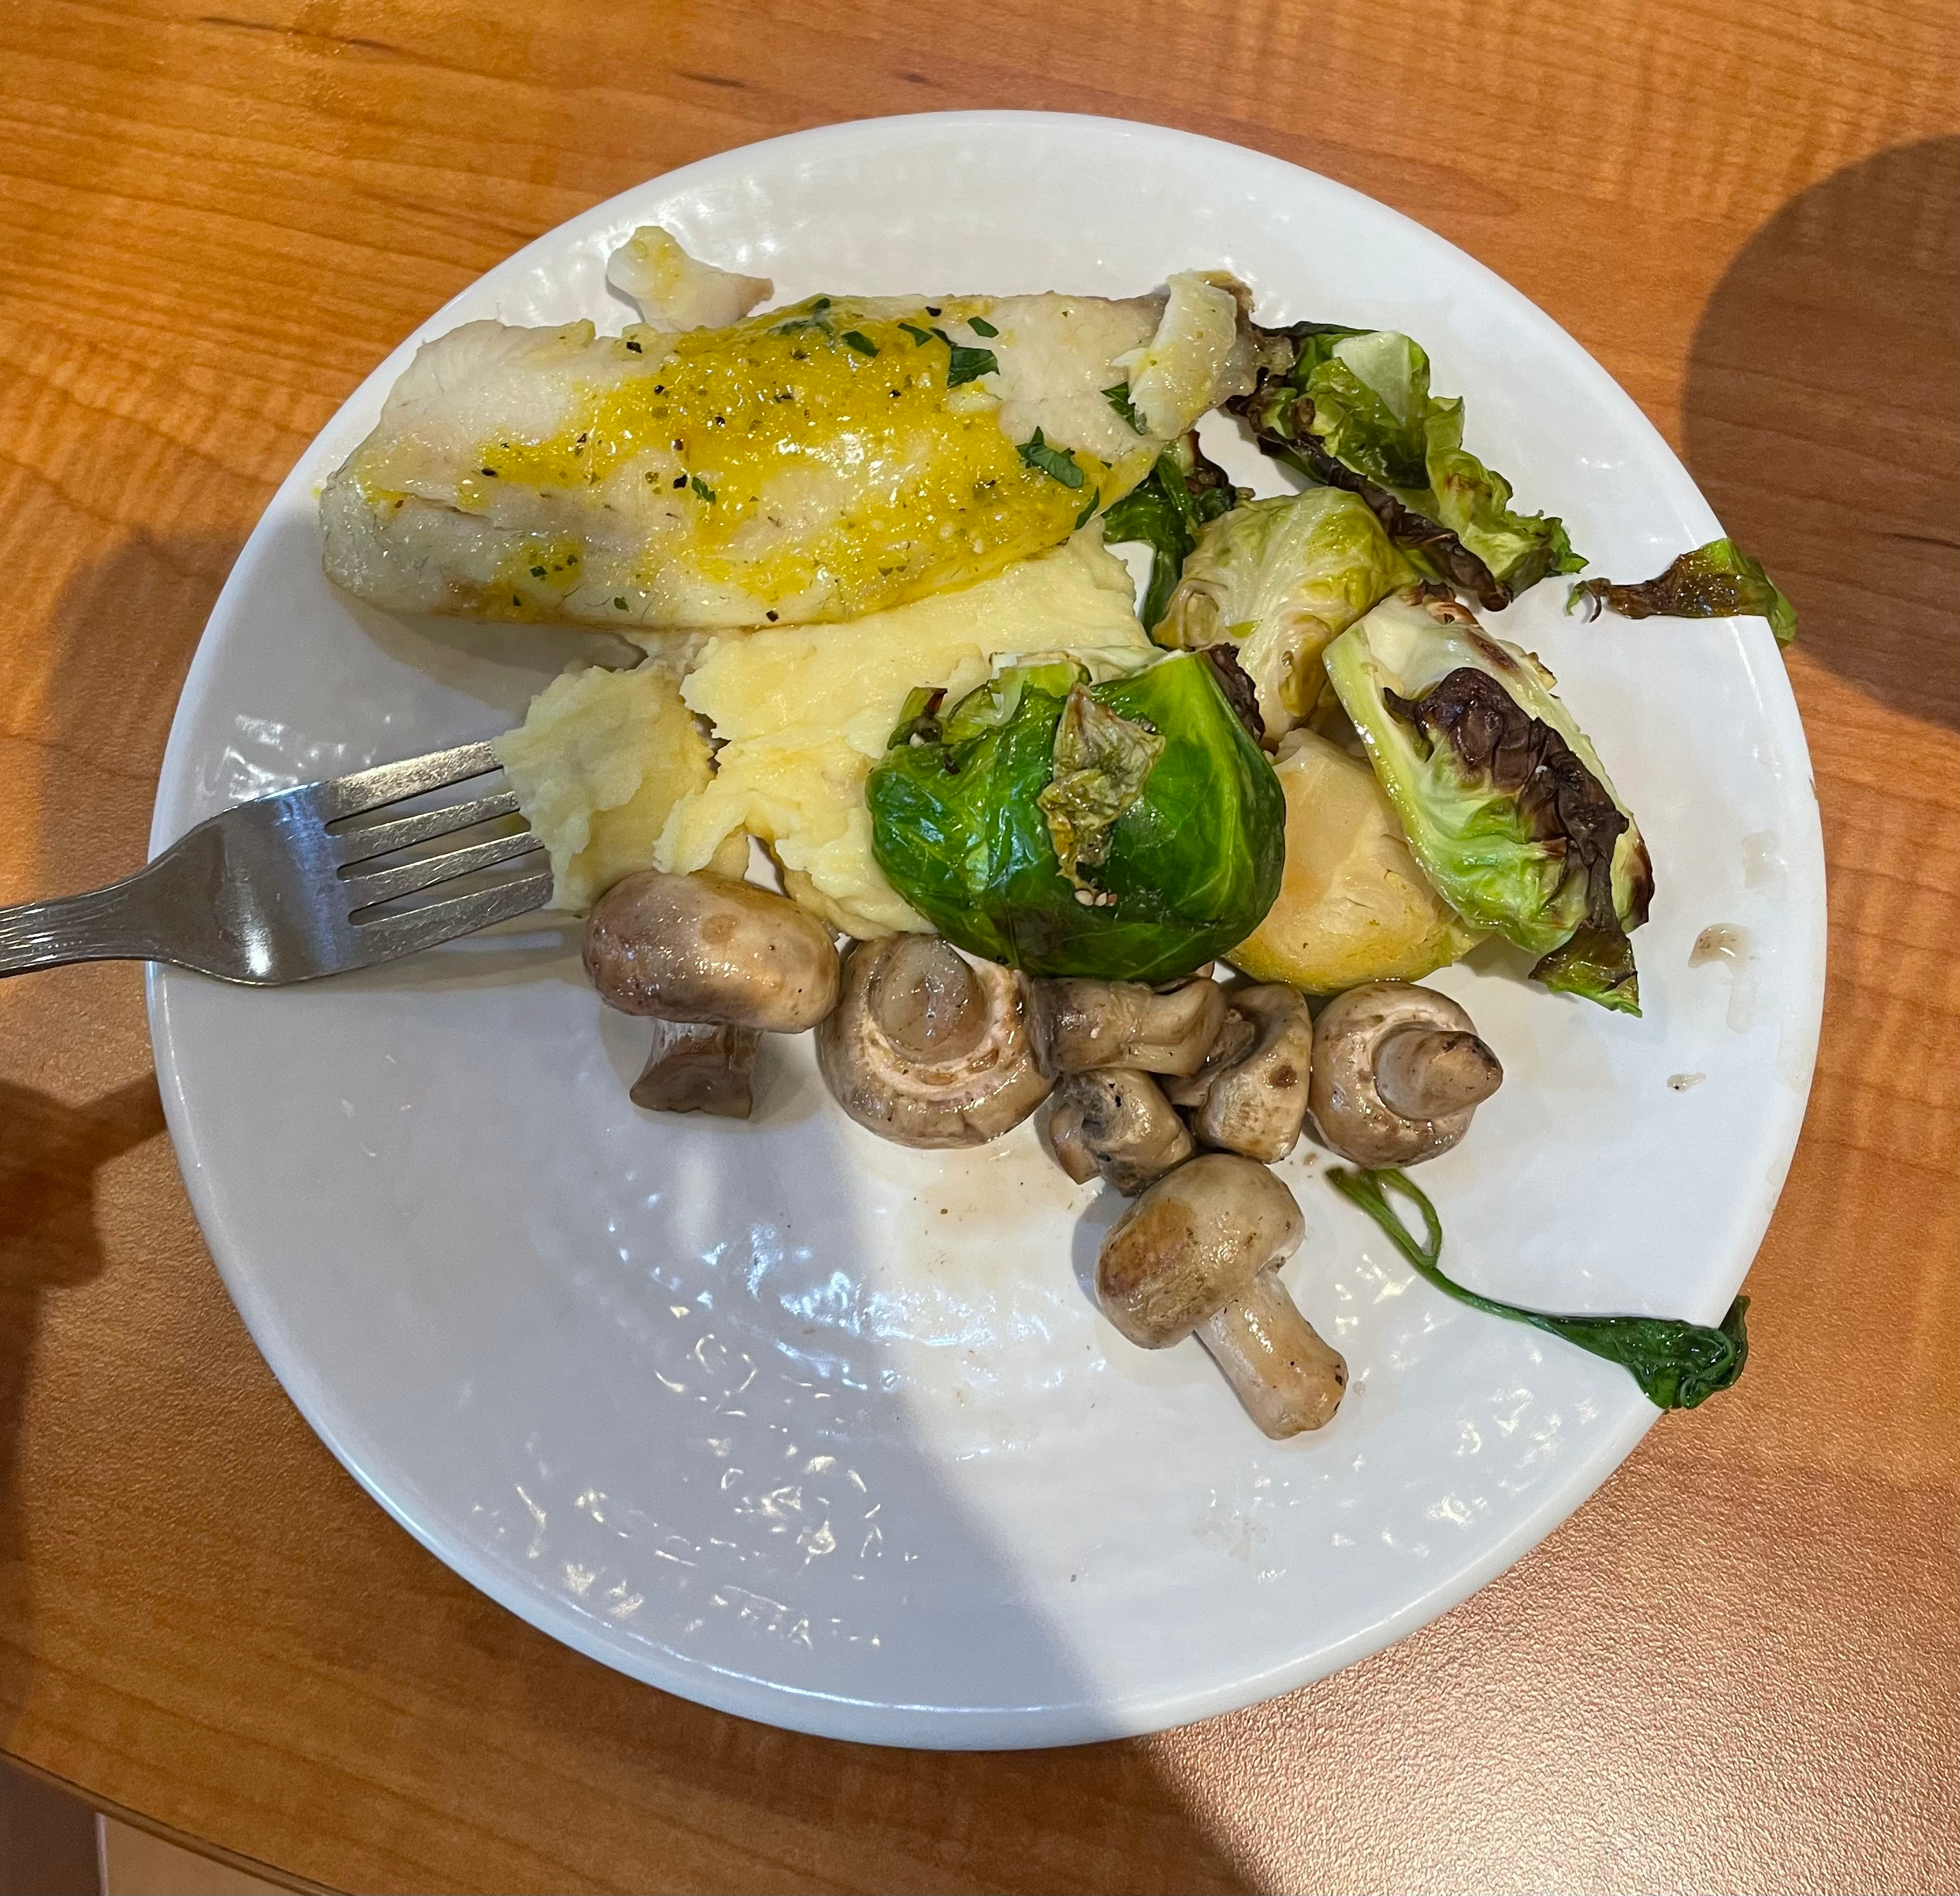 Fish, mashed potatoes, brussel sprouts, and mushrooms